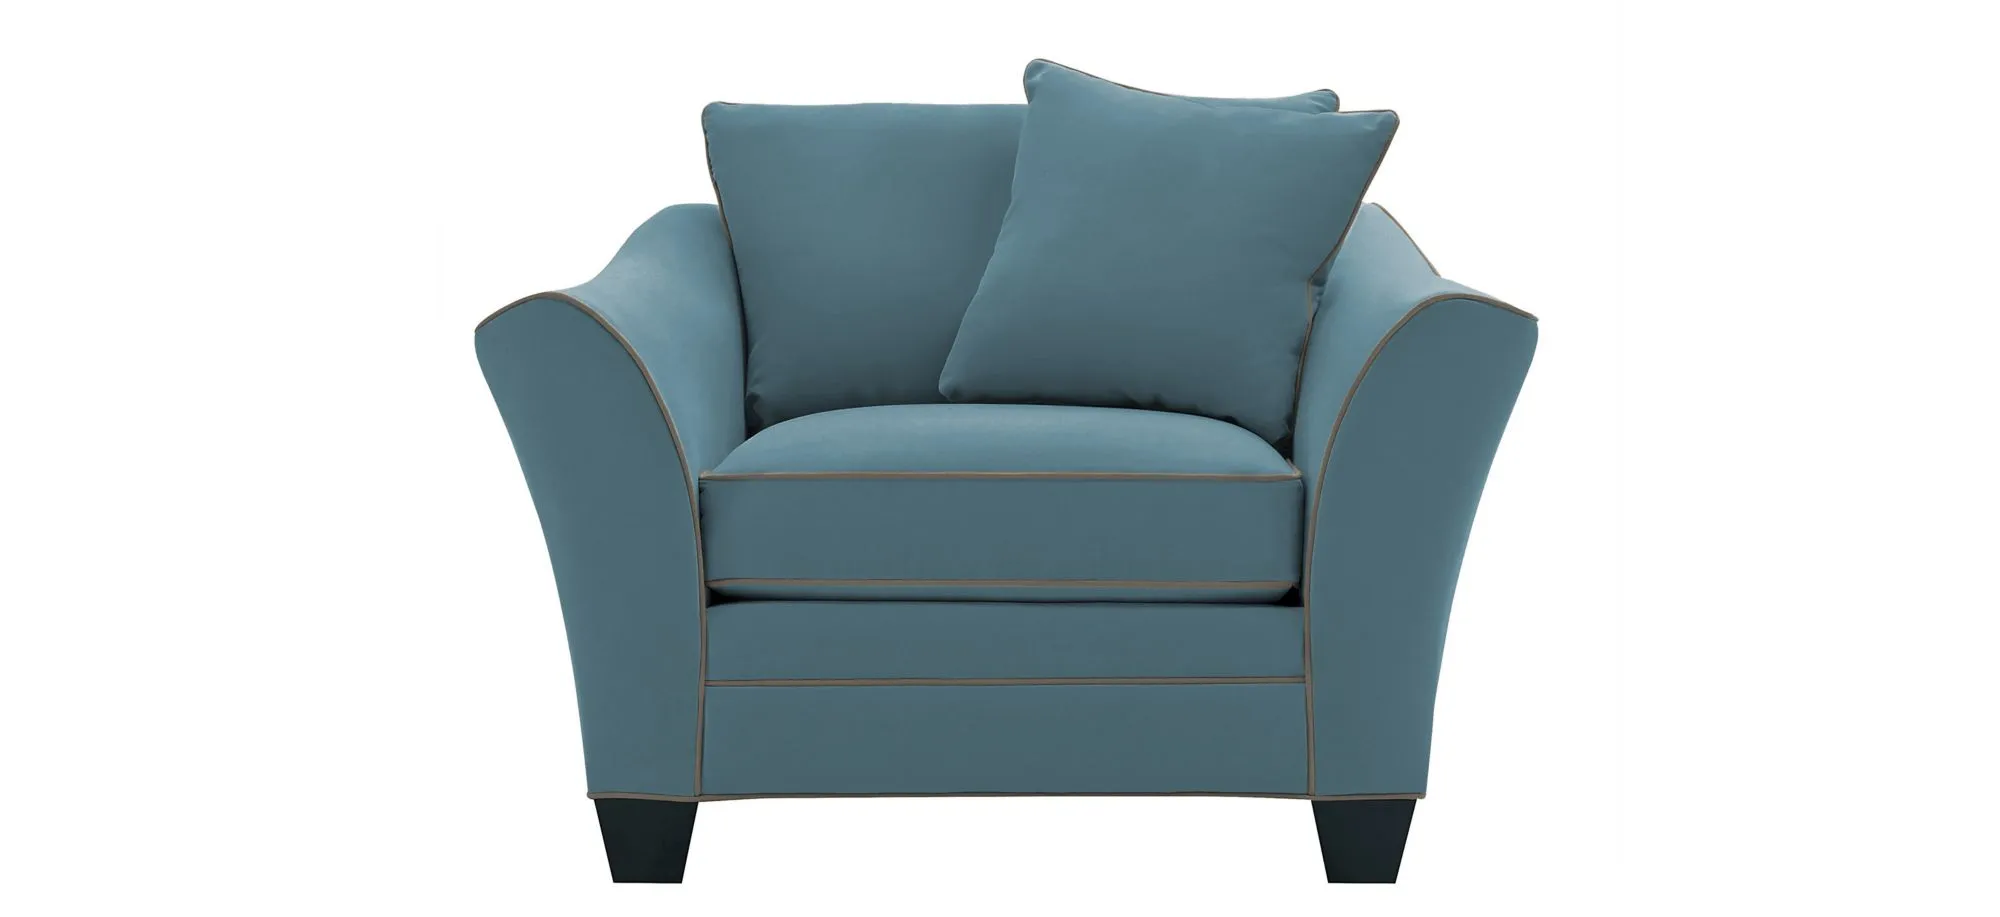 Briarwood Chair in Suede So Soft Indigo/Mineral by H.M. Richards